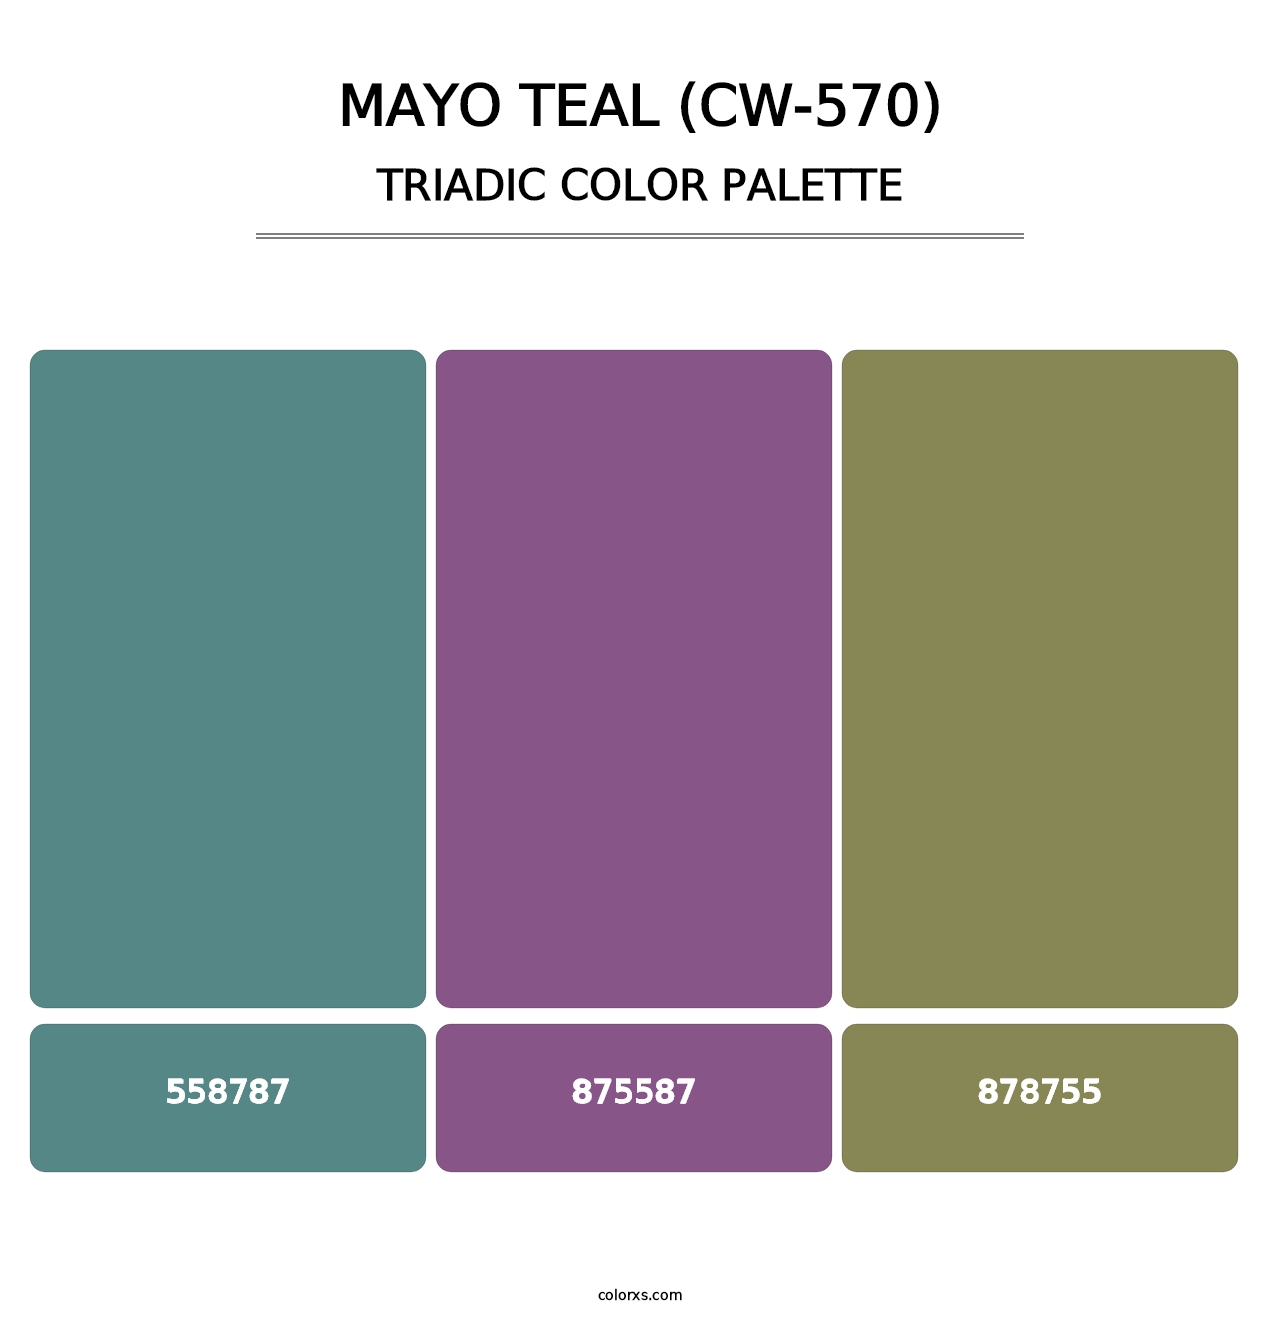 Mayo Teal (CW-570) - Triadic Color Palette